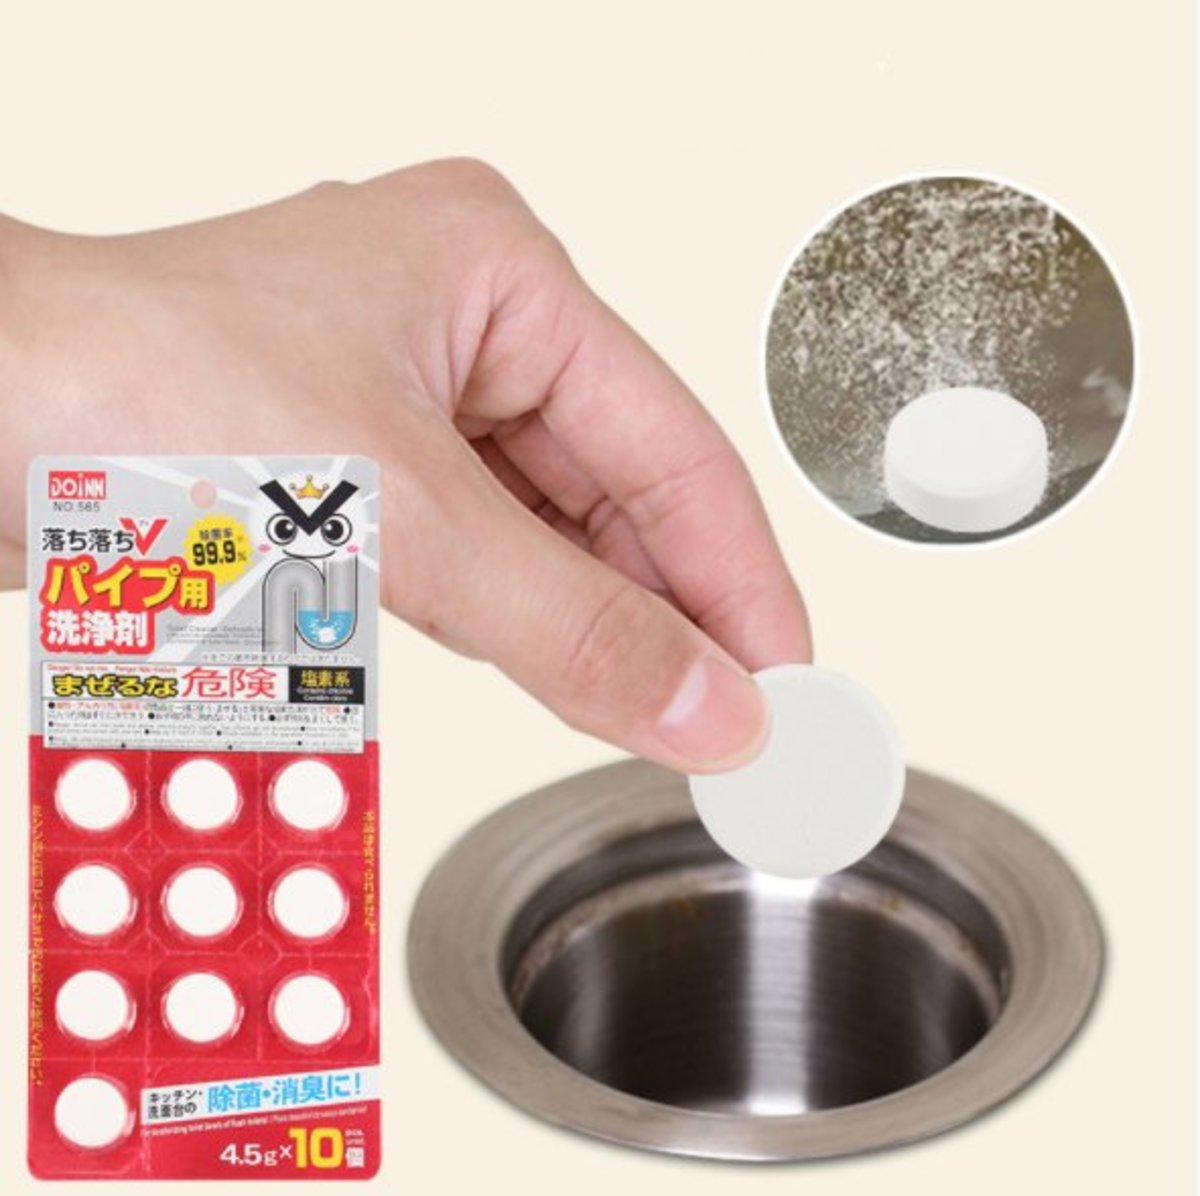 DOINN-Japan Drainage Cleaning Tablets (10 capsules) x 1 pack